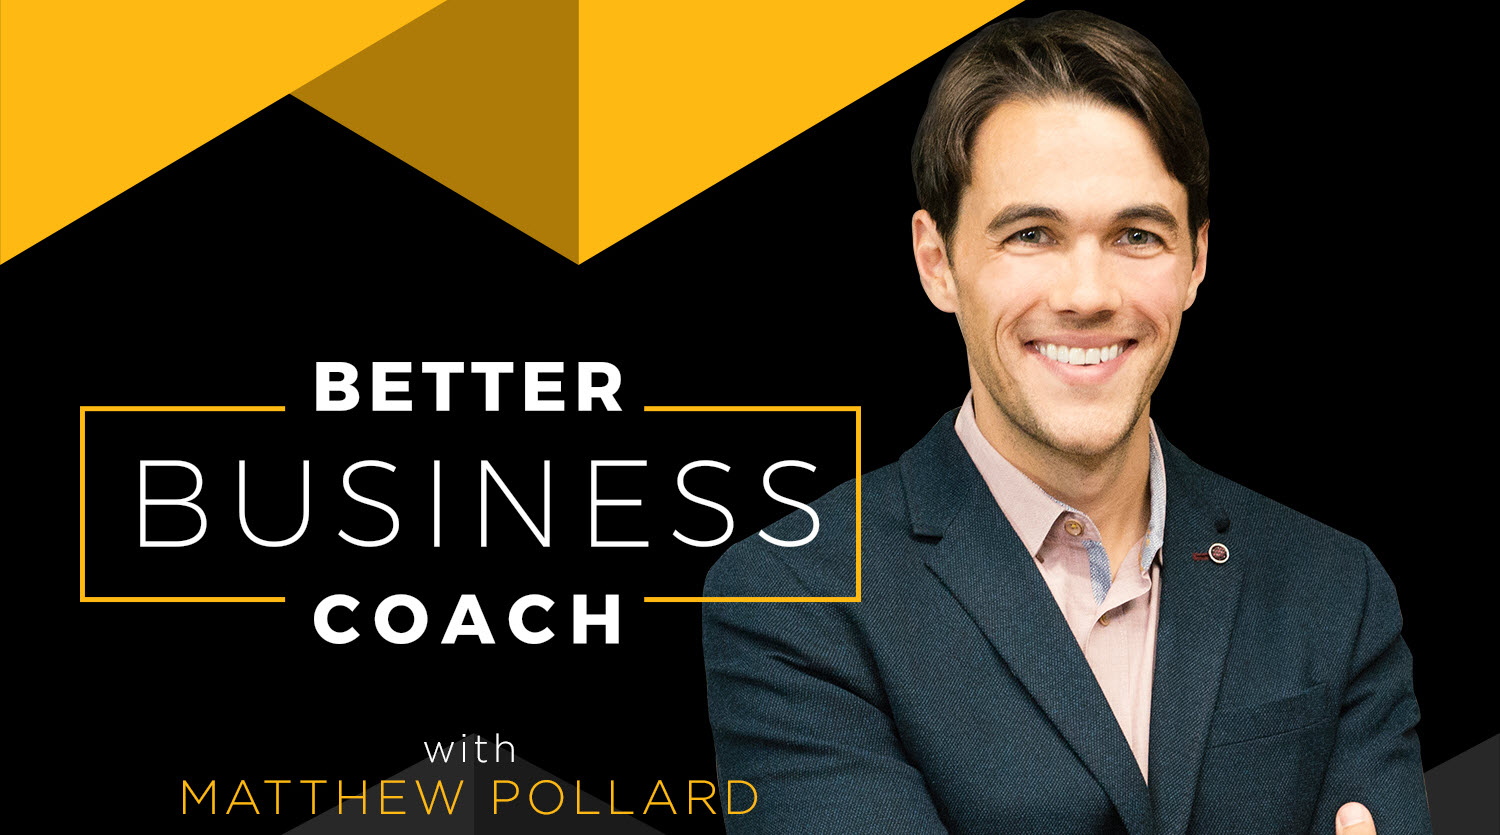 Podcast Interview: Business Coaching with Patti Mara the BUSINESS COACH -  Patti Mara